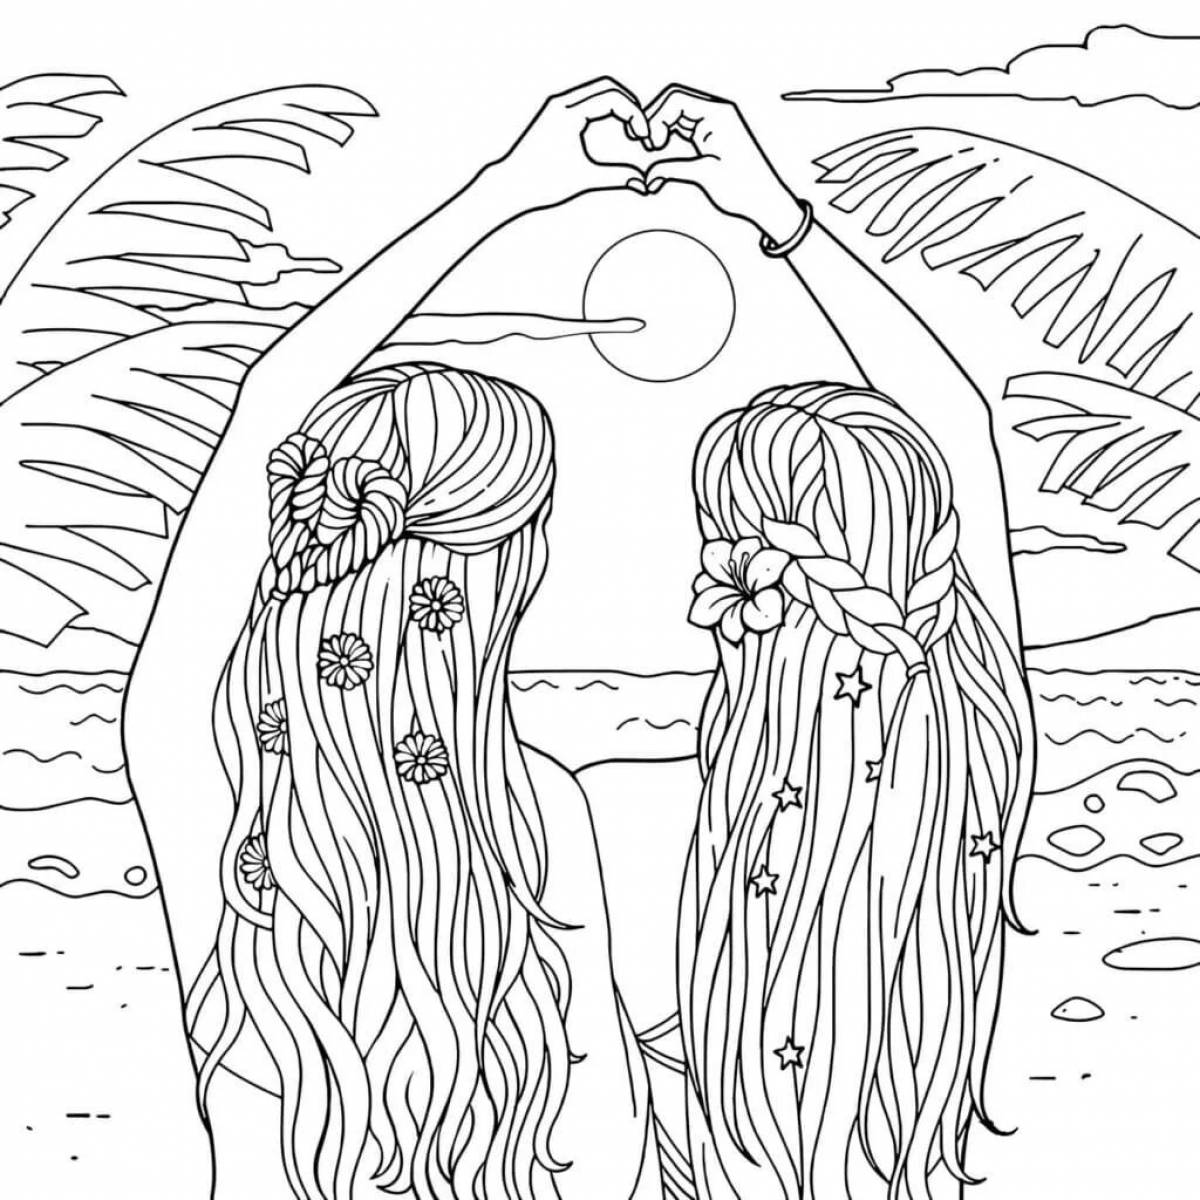 Exciting coloring page 11 for girls